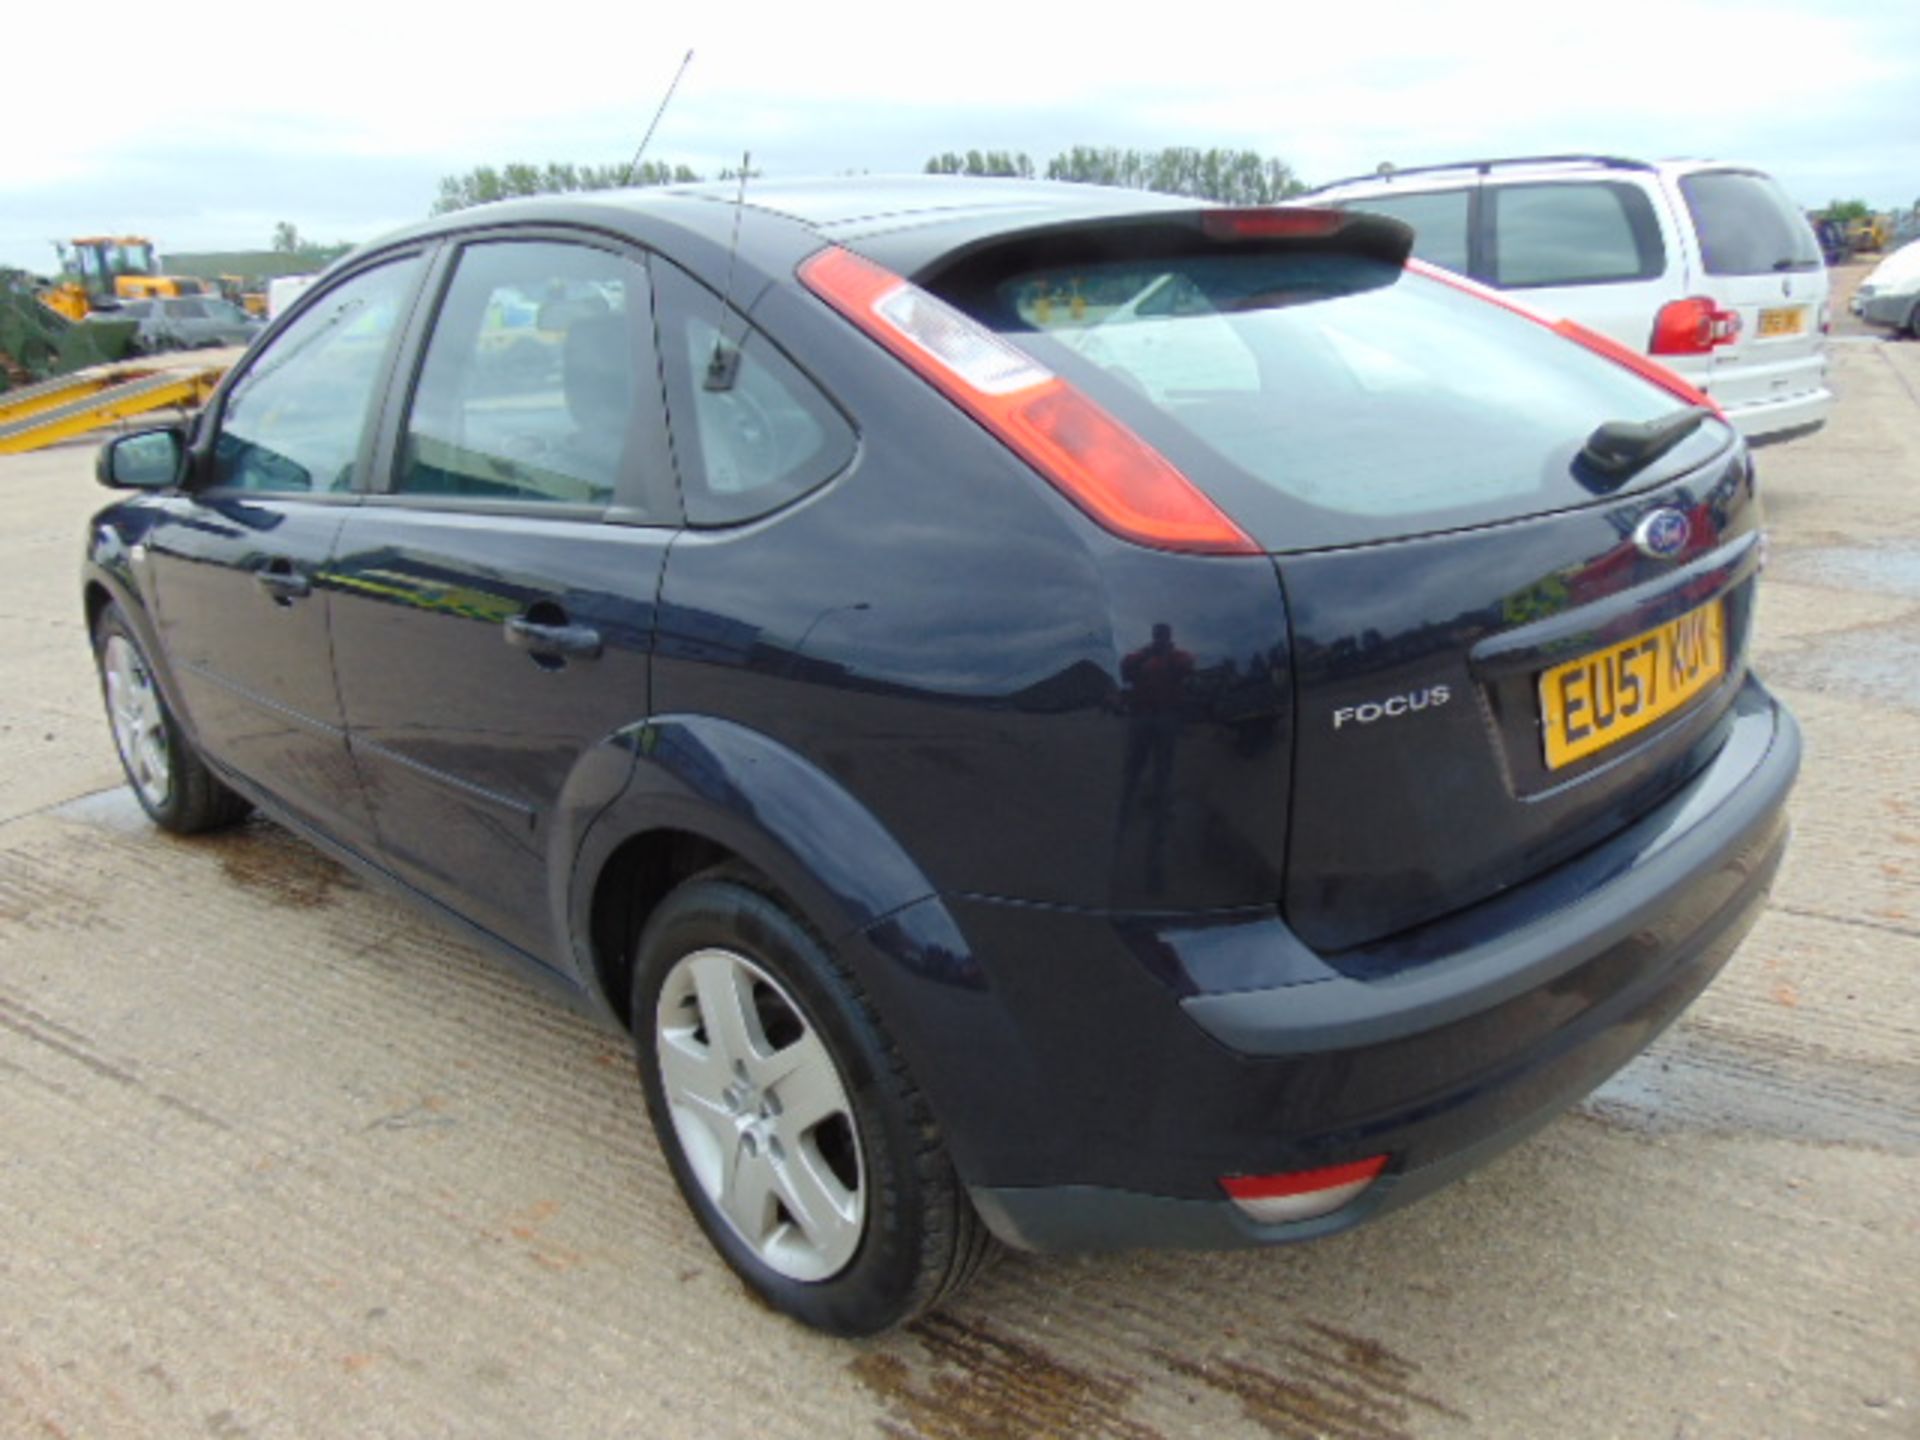 Ford Focus 1.8 TDCI Style Hatchback - Image 8 of 18